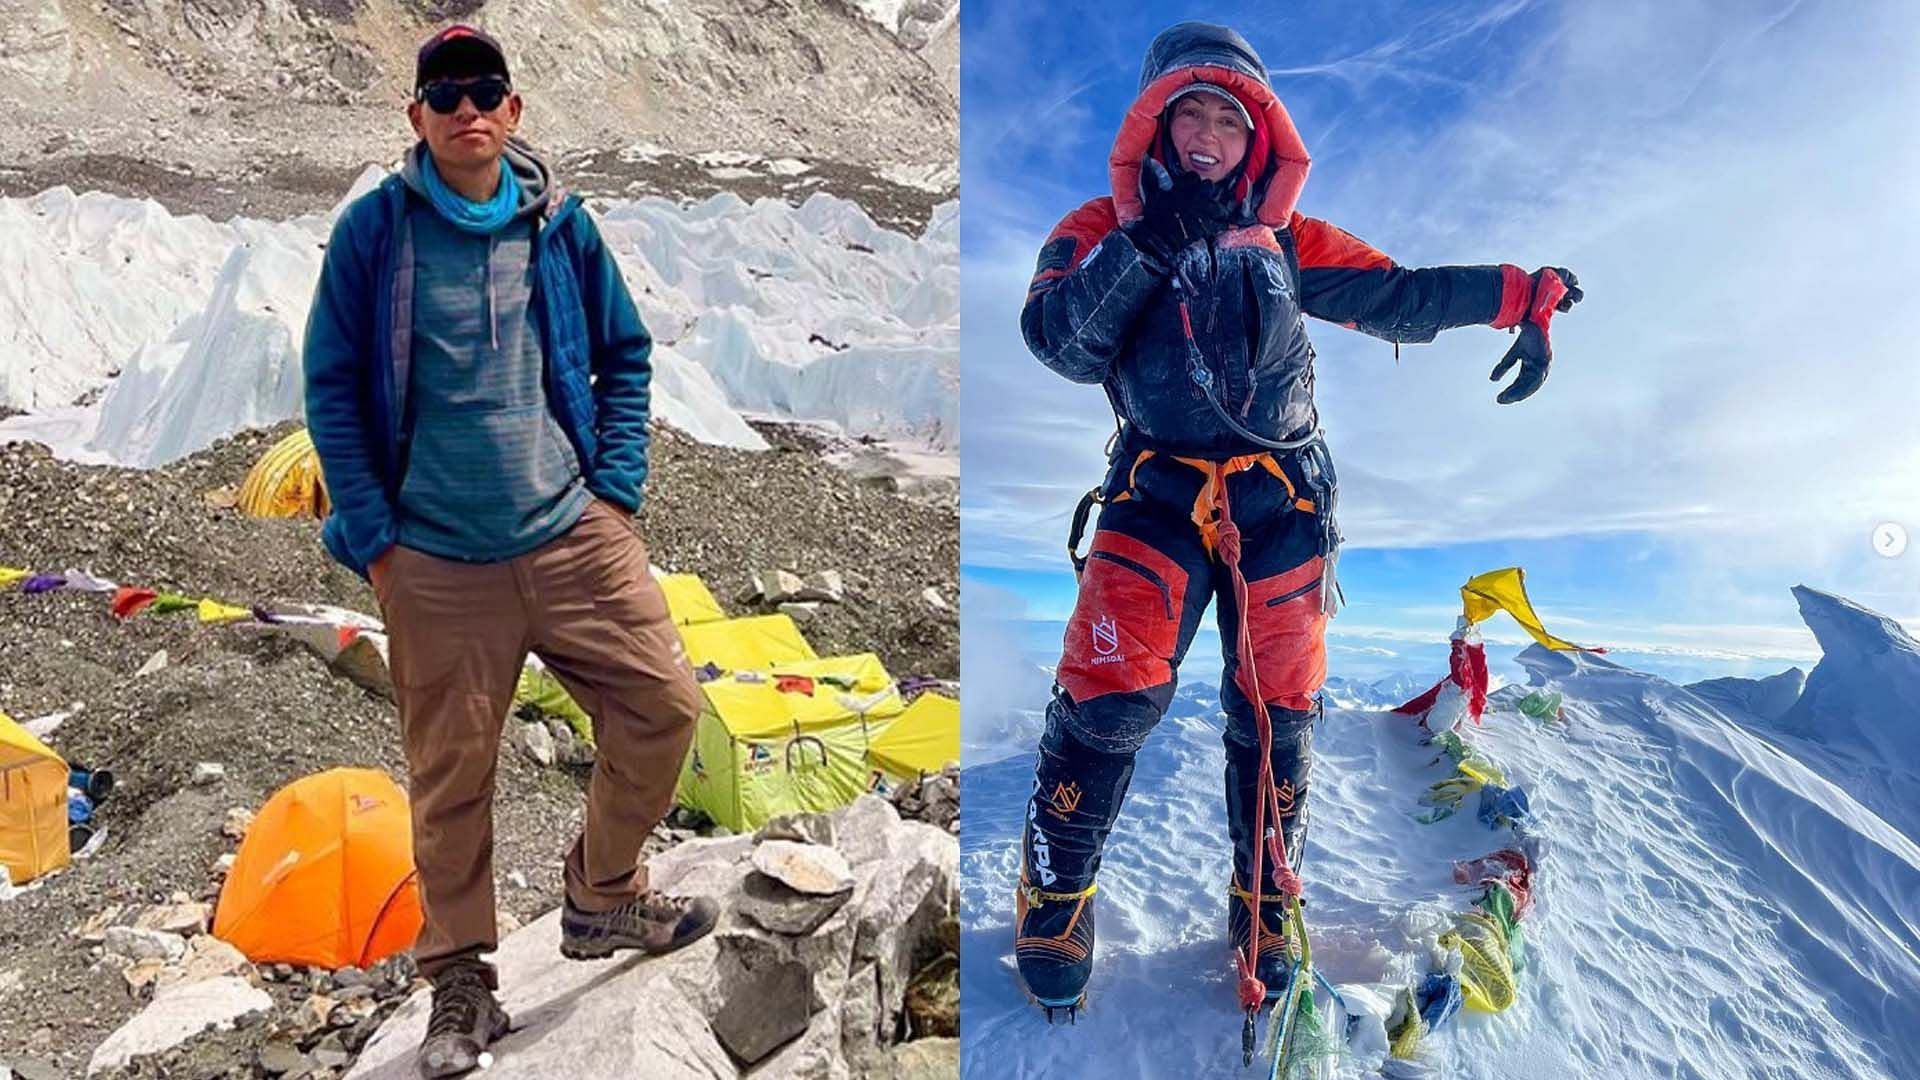 Two avalanches in Tibet claims the lives of Anna Gutu and her guide Mingmar Sherpa (Image via Instagram/@mingmar_sherpa, @anyatraveler)